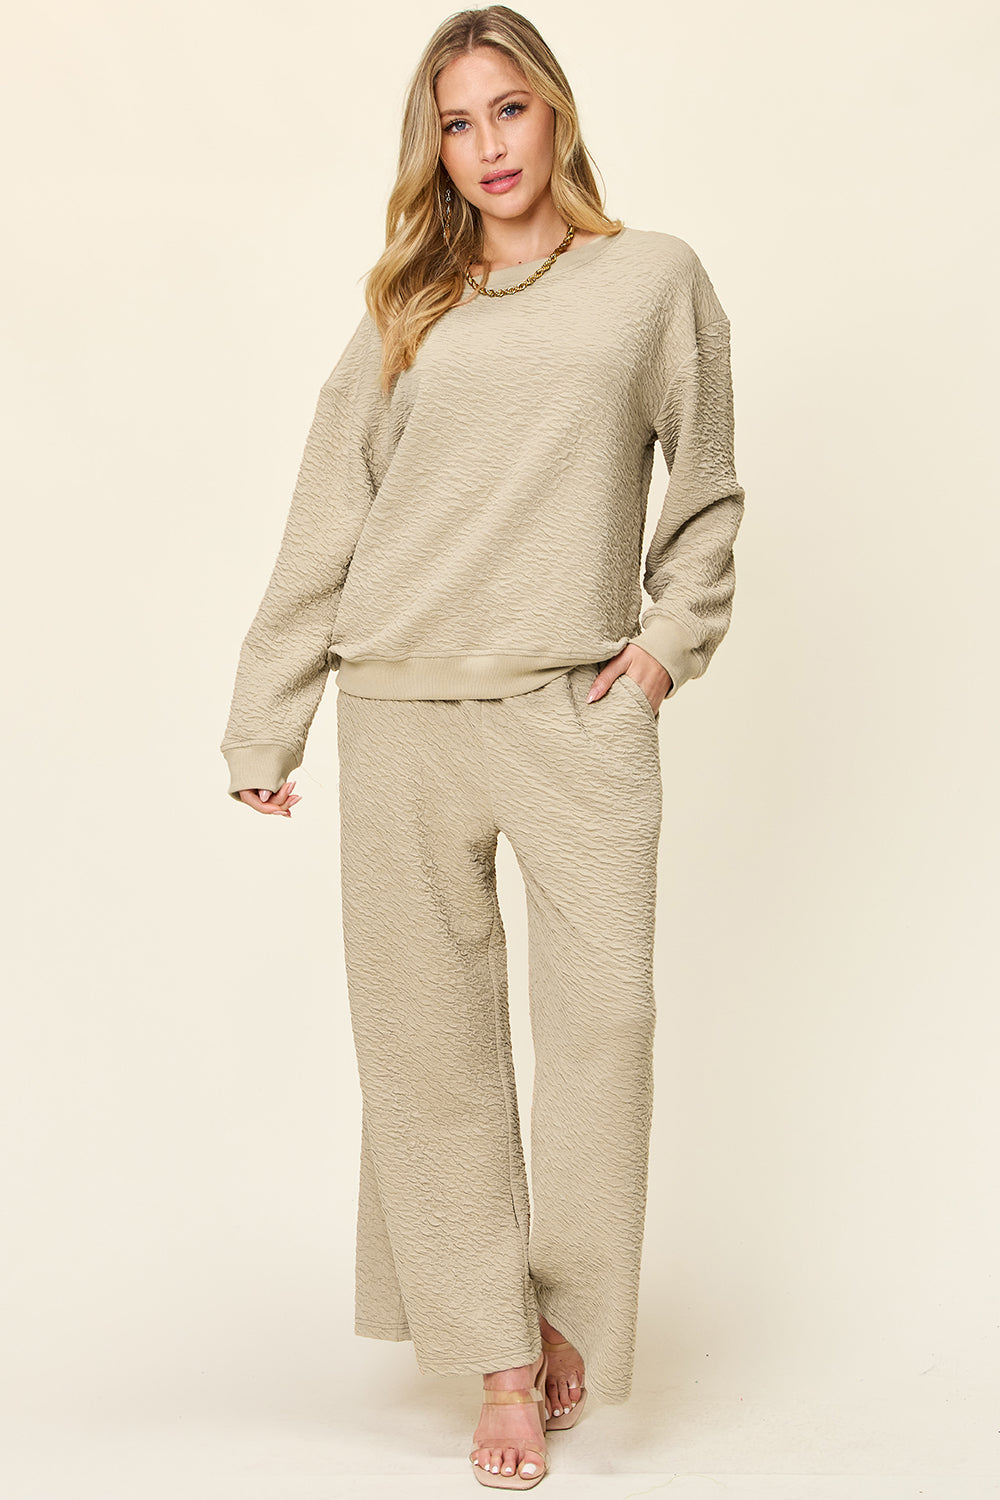 Double Take Texture Long Sleeve Top and Pants Set